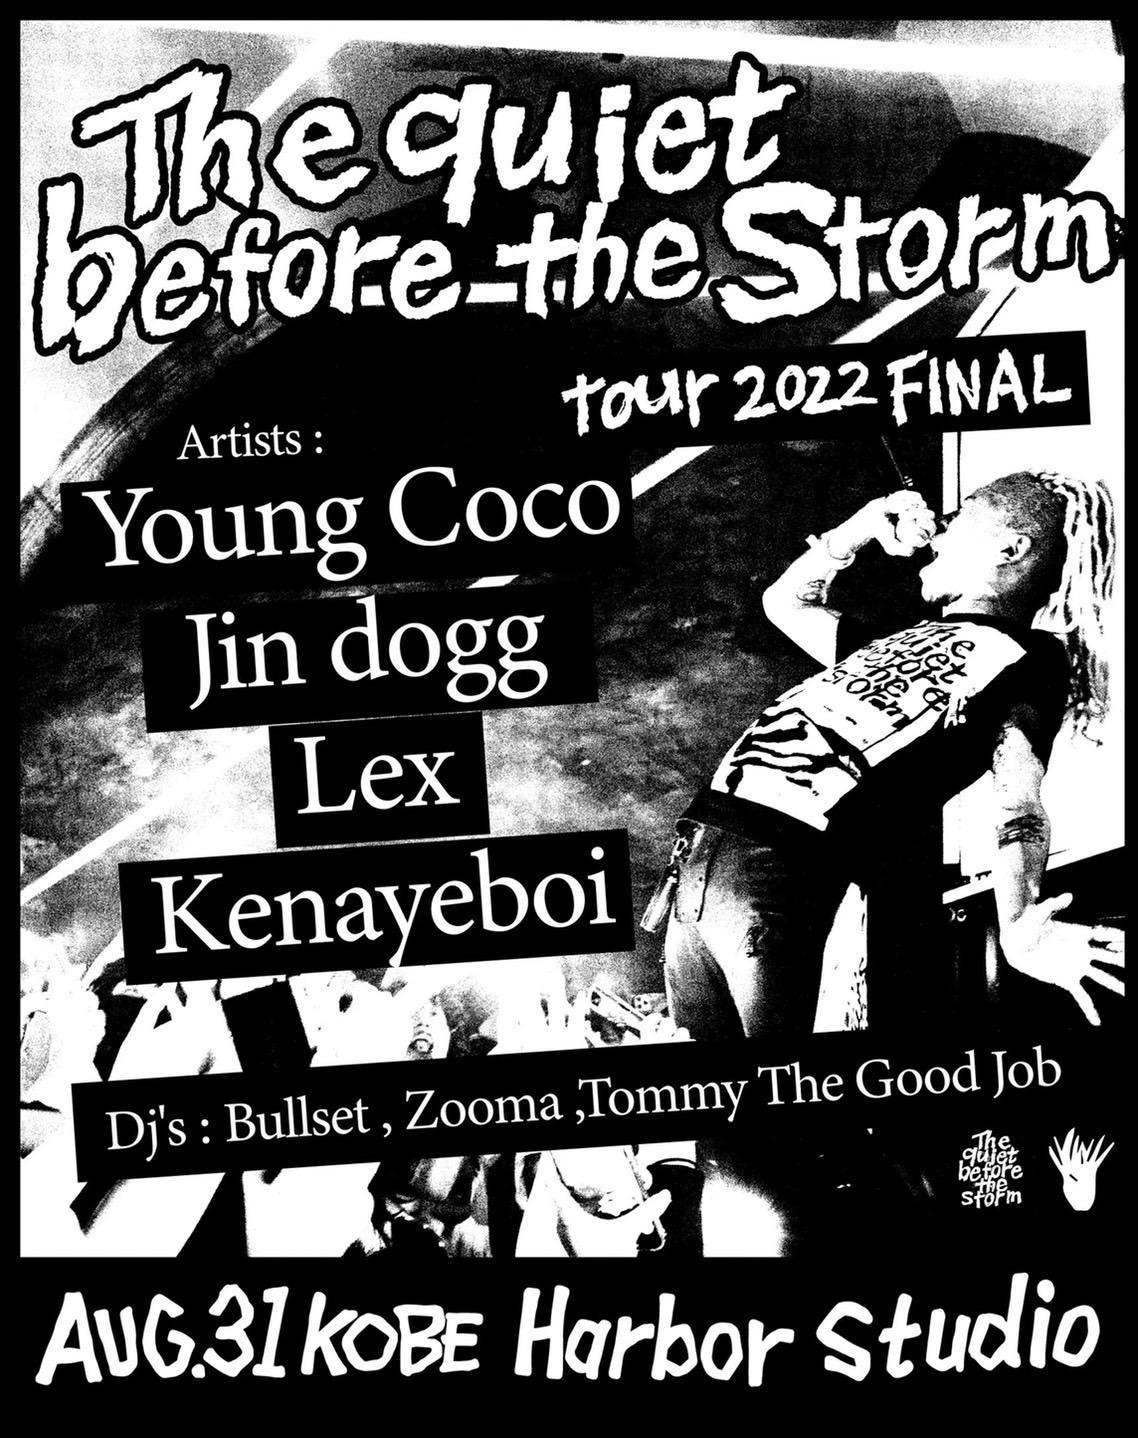 Young Coco 『The quiet before the storm tour 2022』